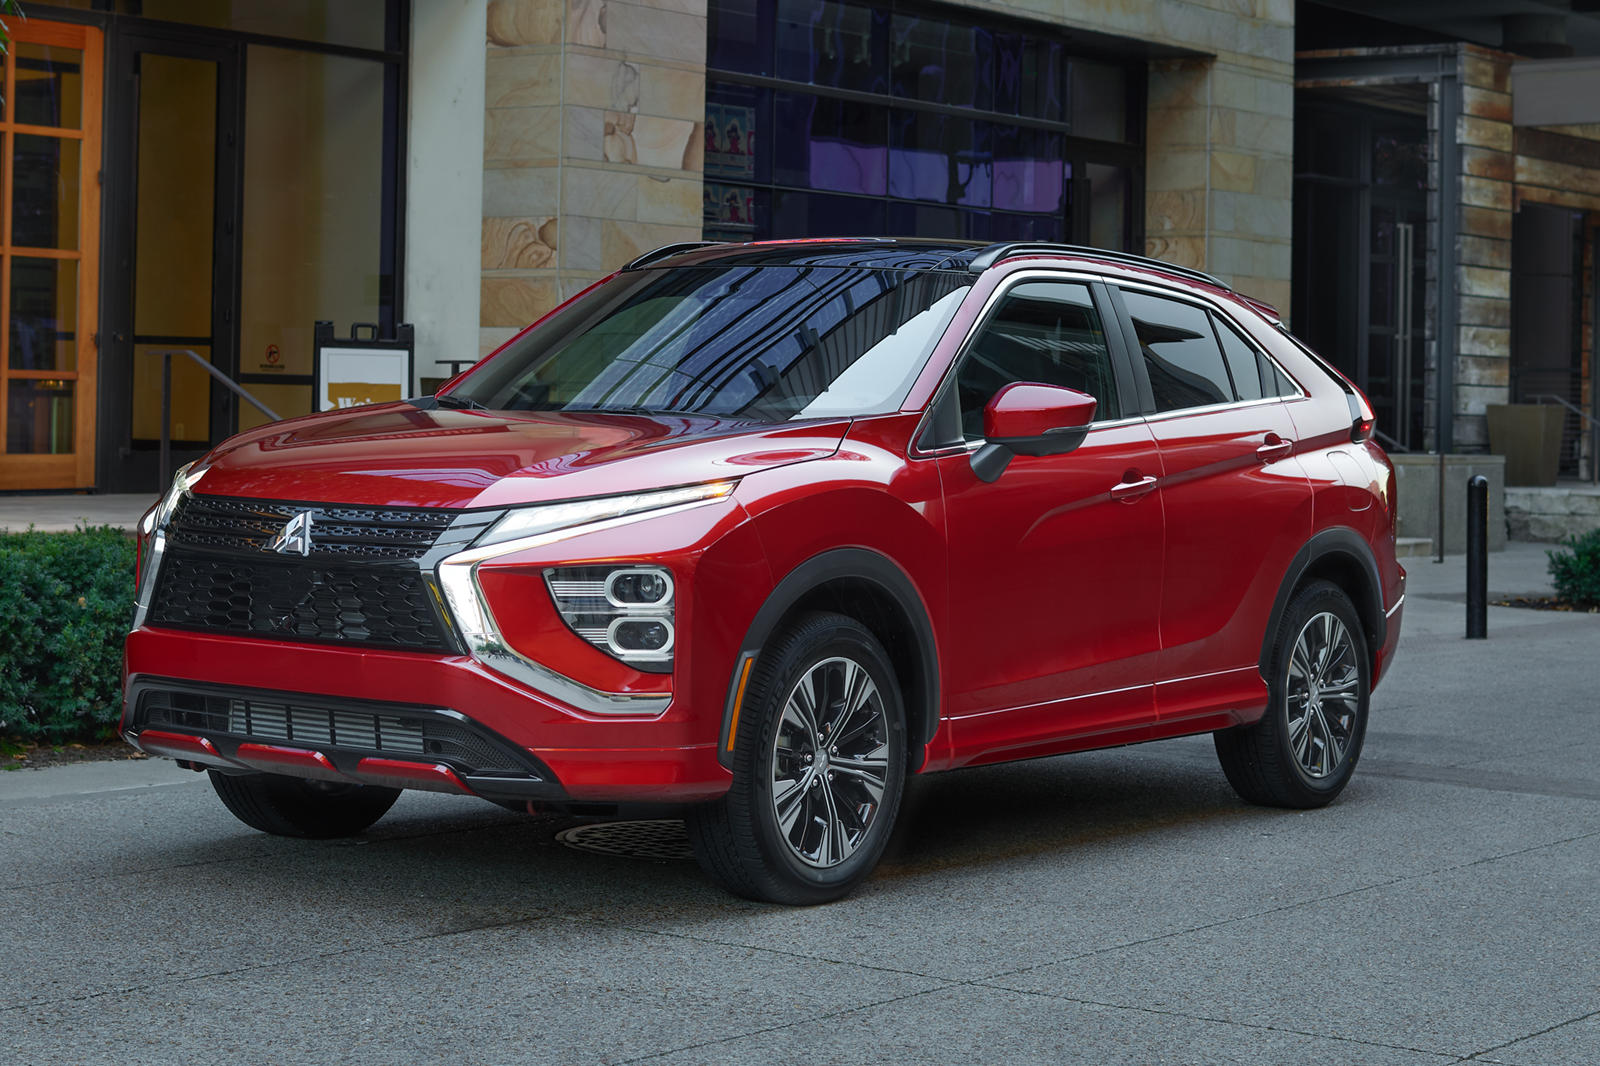 2022 Mitsubishi Eclipse Cross Arrives With Higher Price